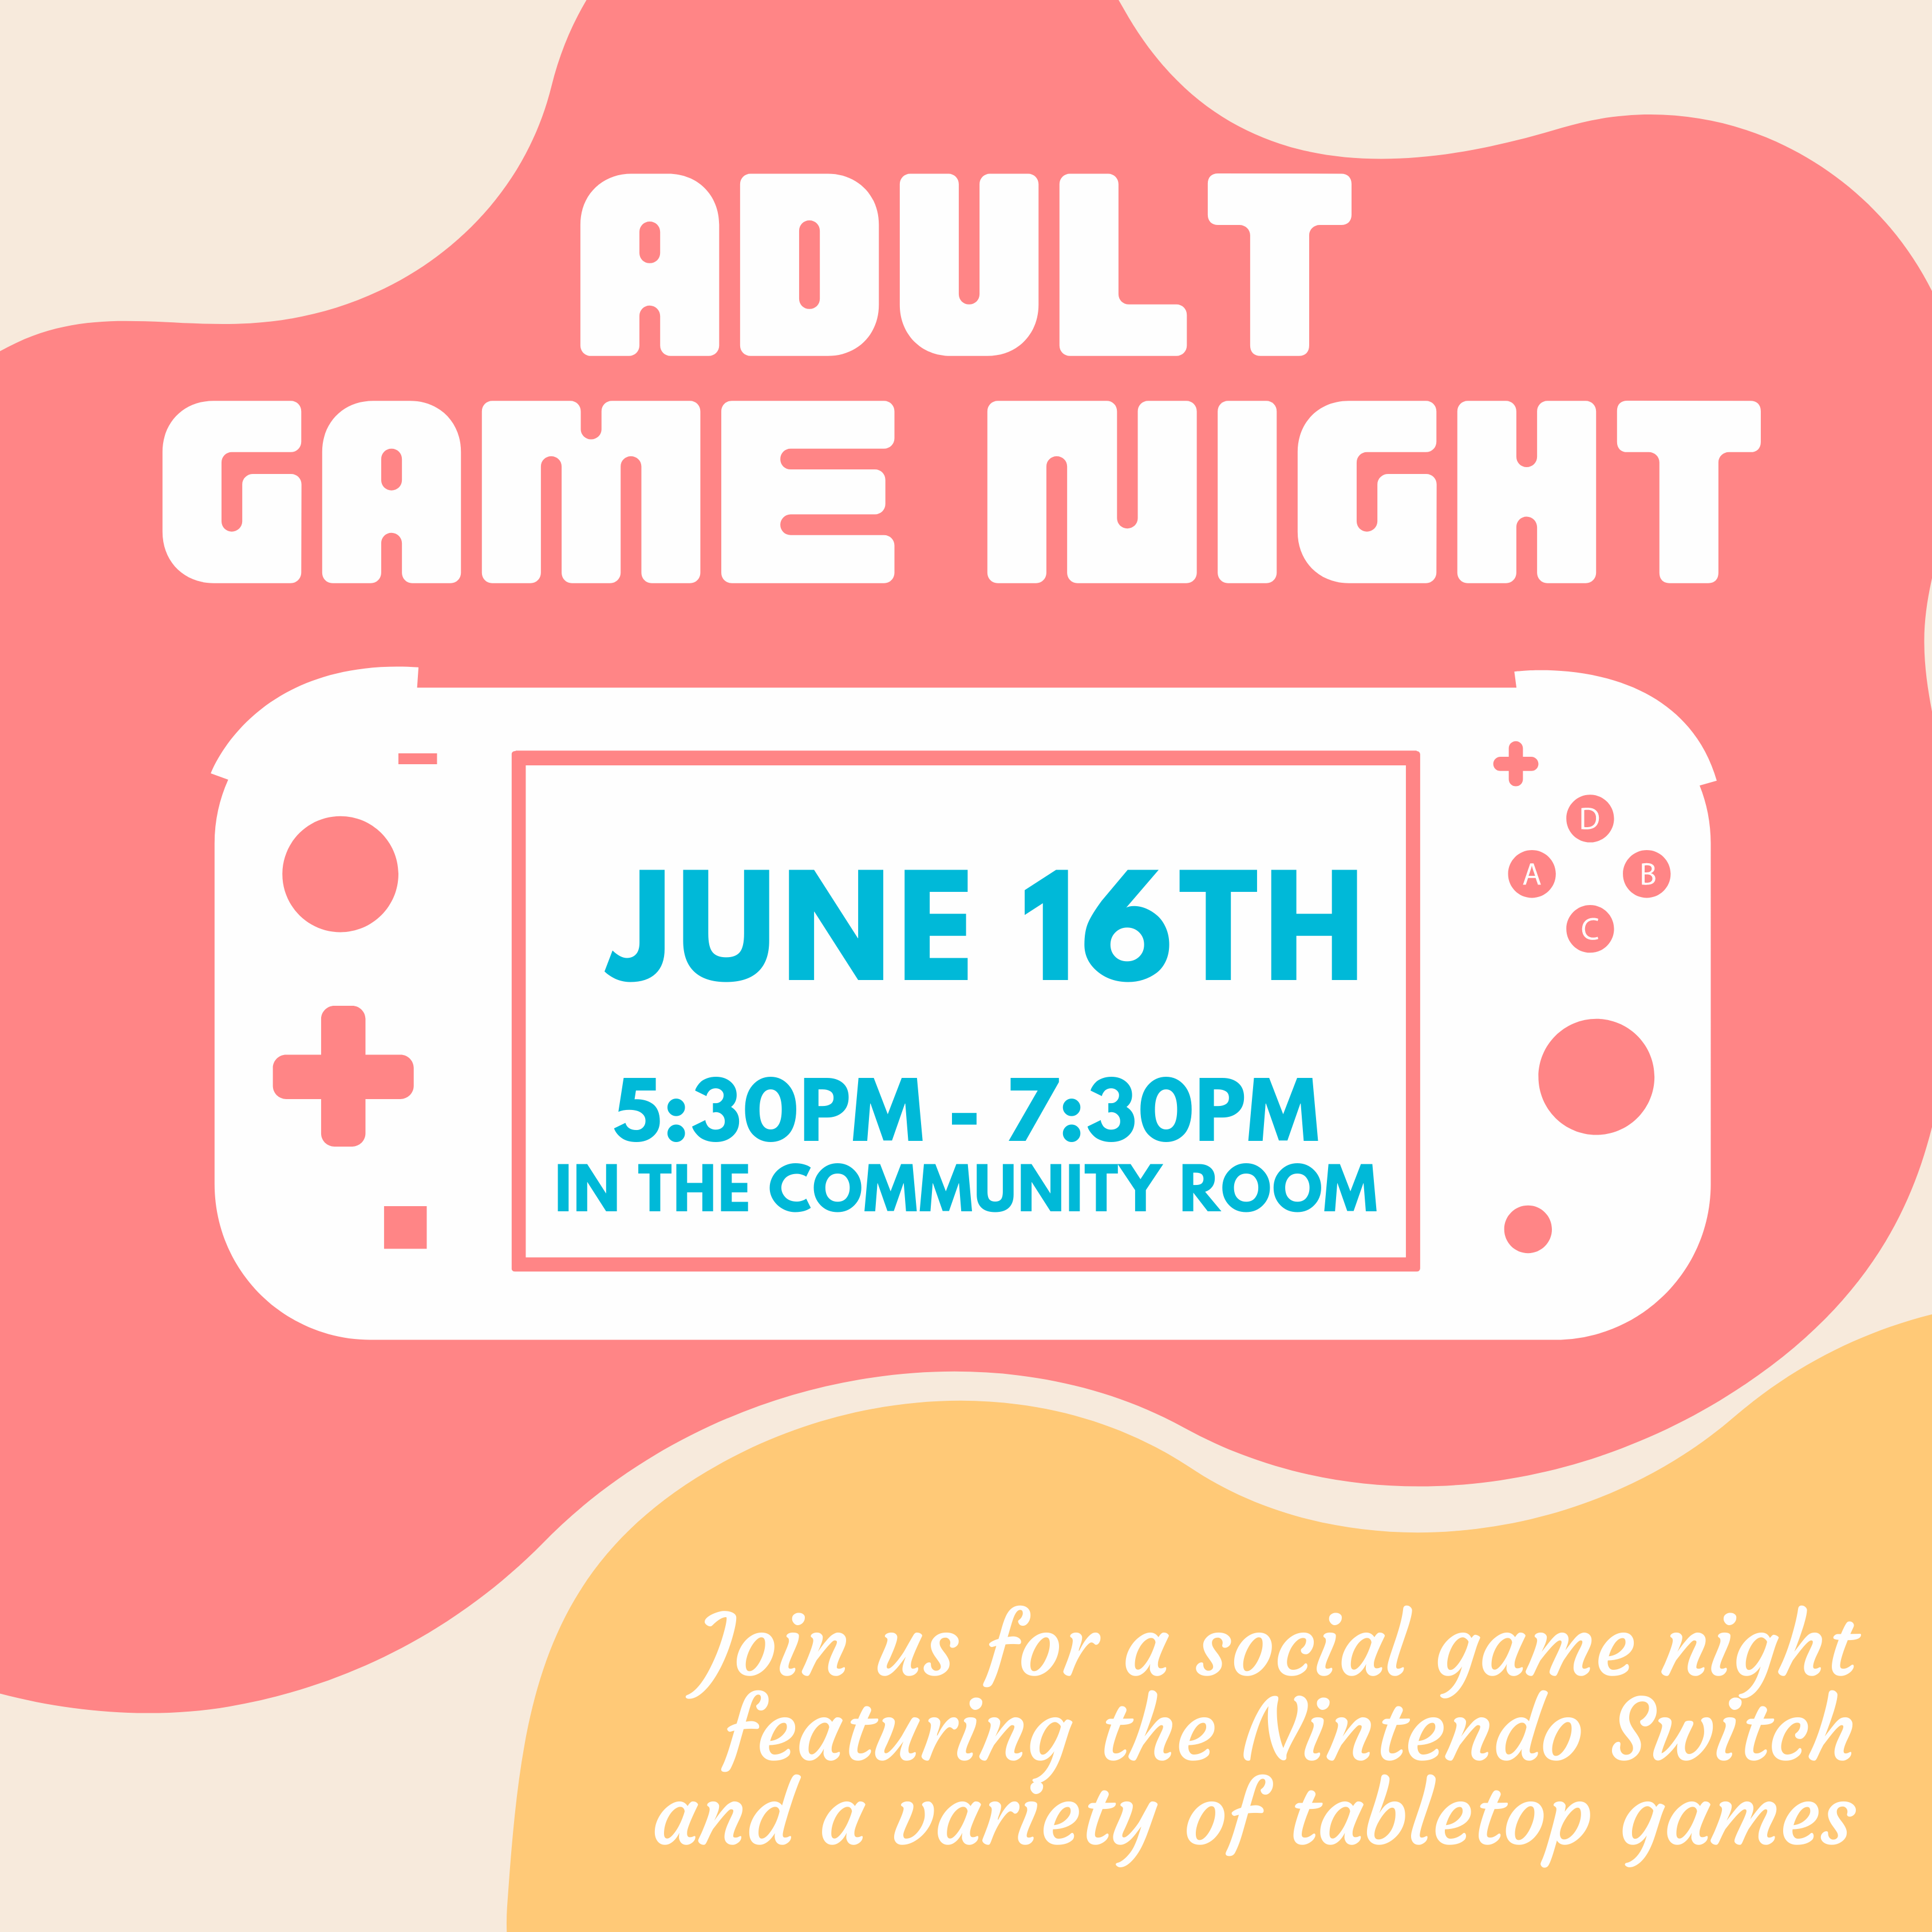 Video Game Night for adults 18+. June 16th  from 5:30PM to 7:30PM In the community room. Join us for a social game night featuring the Nintendo Switch and a variety of tabletop games.